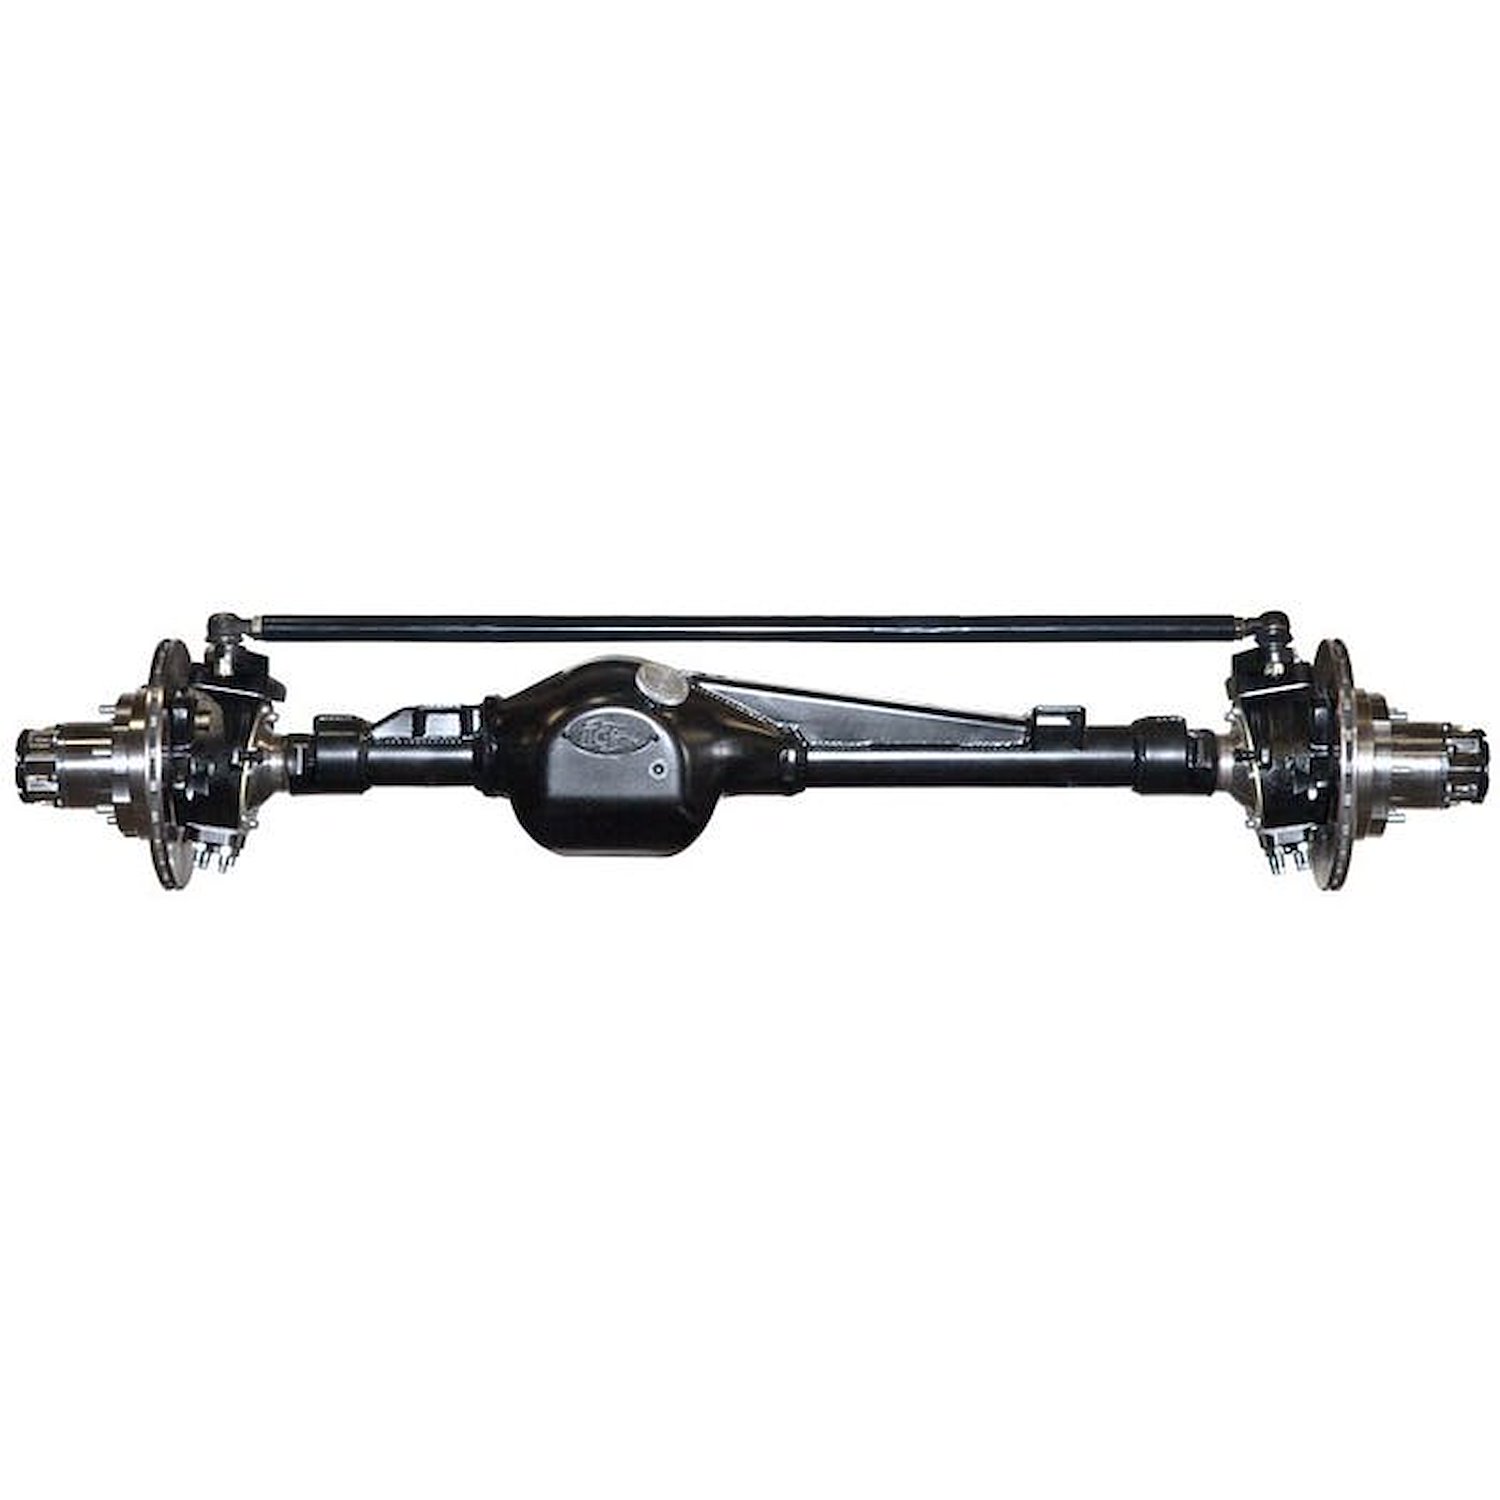 301608-1-KIT Rock Assault Fully-Built Front Axles, +3 Width, LHD, High-Pinion, 4.88, Grizzly, Creeper Flanges, Toyota